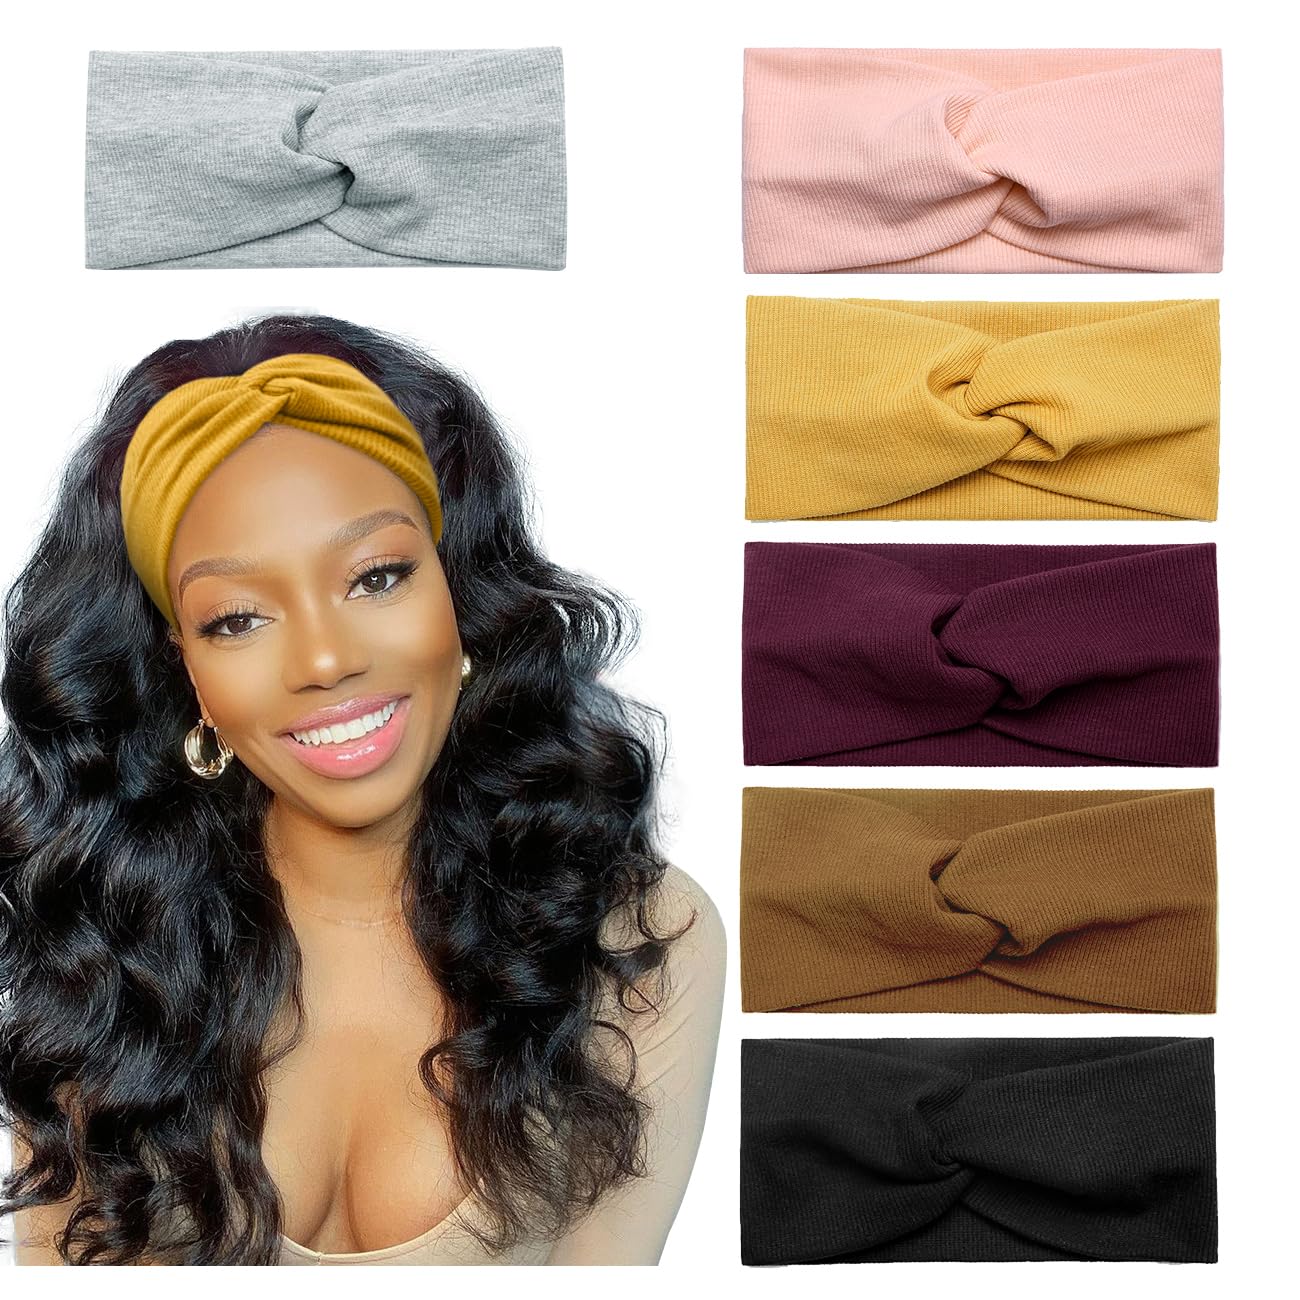 Huachi Turban Headbands for Women Wide Head Wraps Knotted Elastic Teen Girls Yoga Workout Solid Color Hair Accessories, 6 Pack